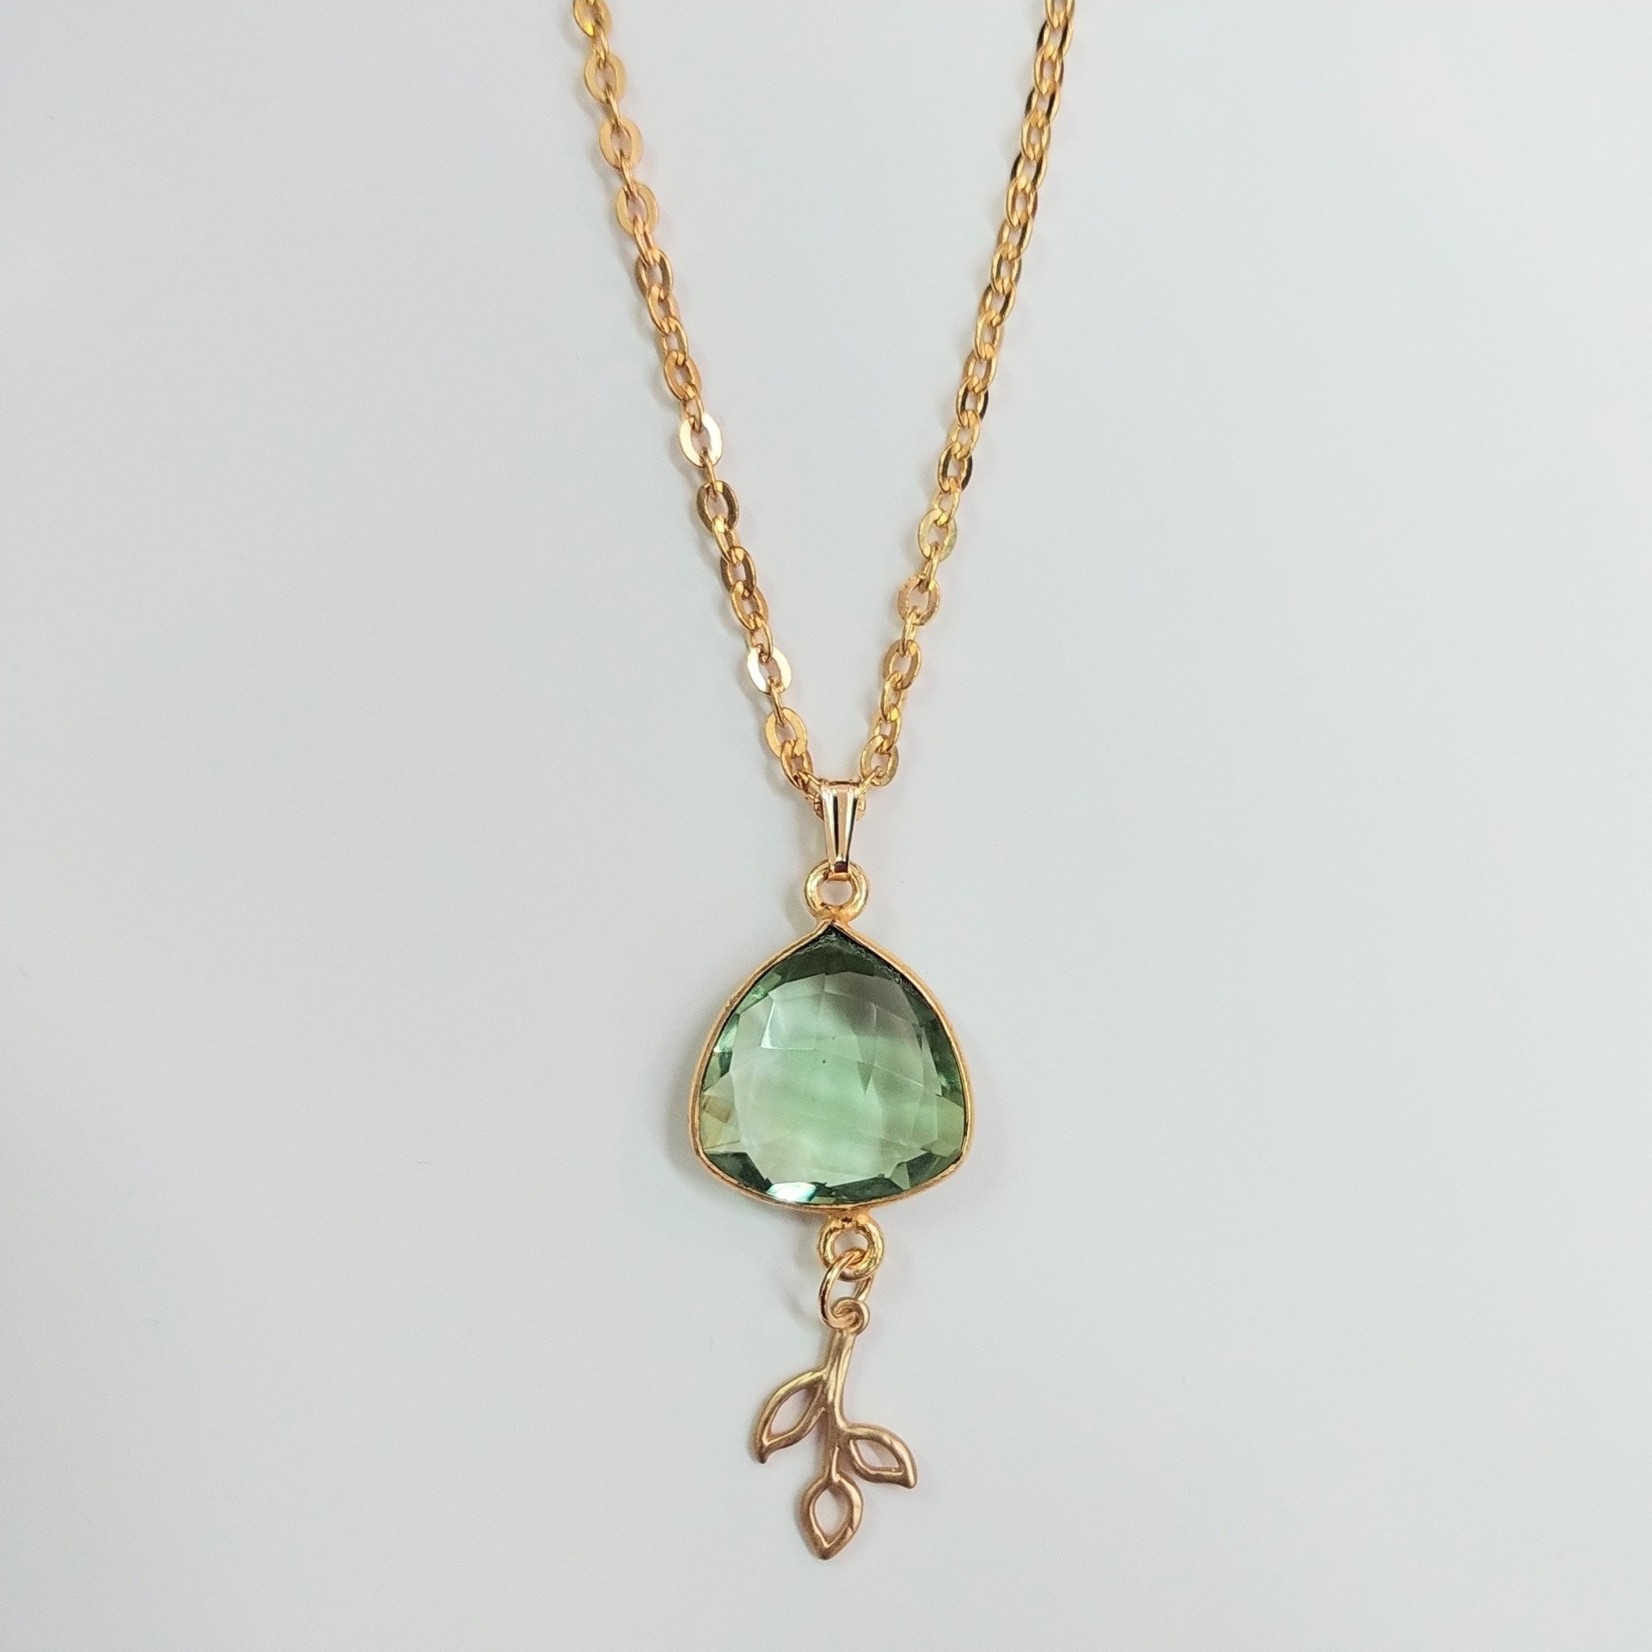 Green Amethyst with Leaf 16.5" Brass Chain Necklace - Ready to Wear